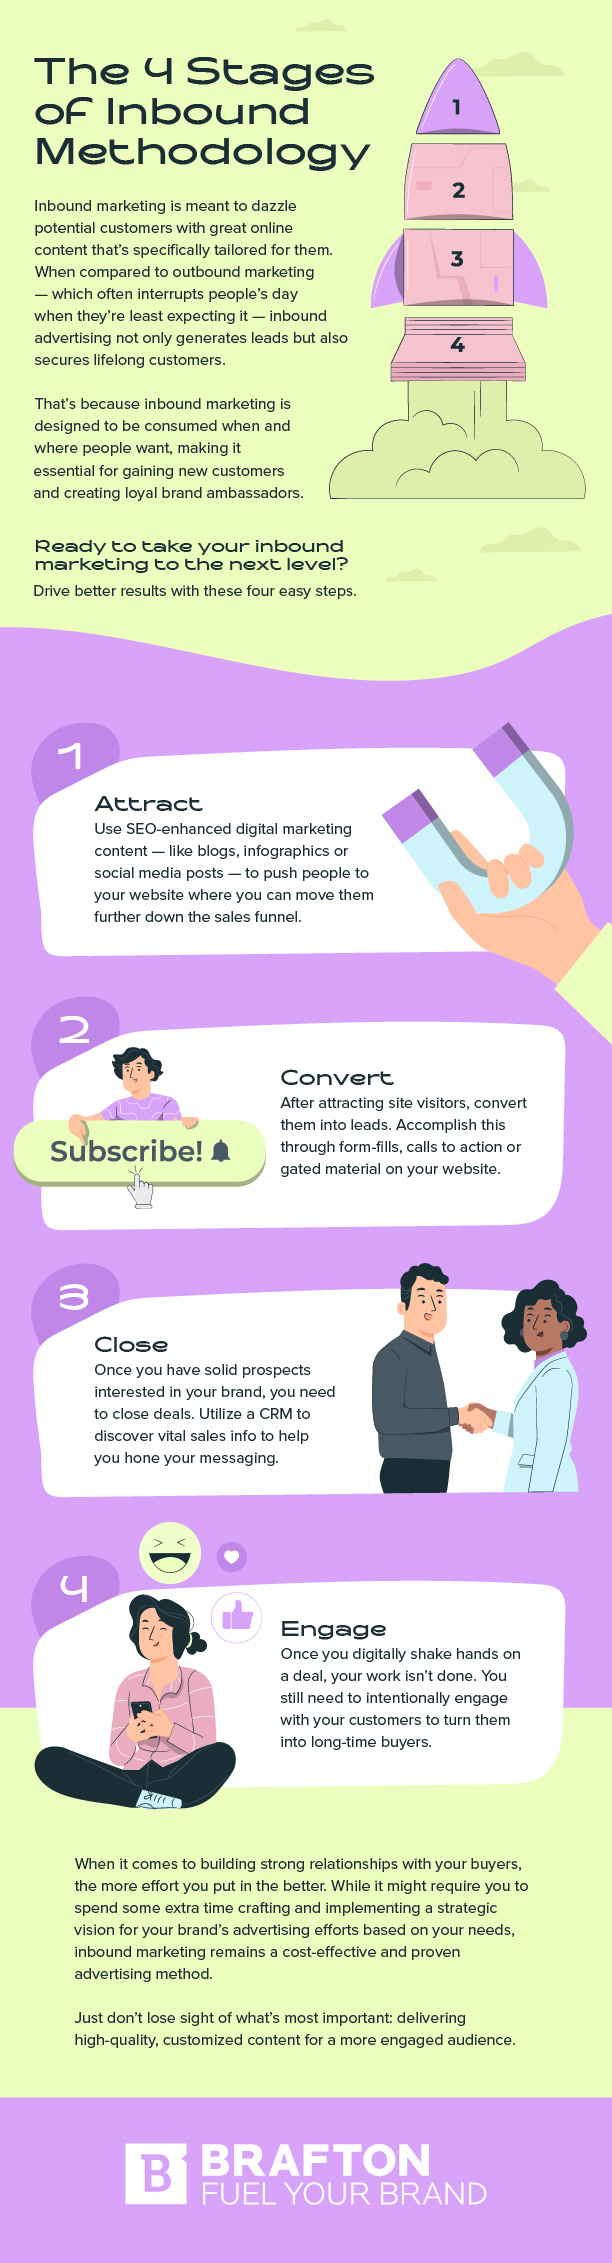 Infographic The 4 Stages of Inbound Methodology